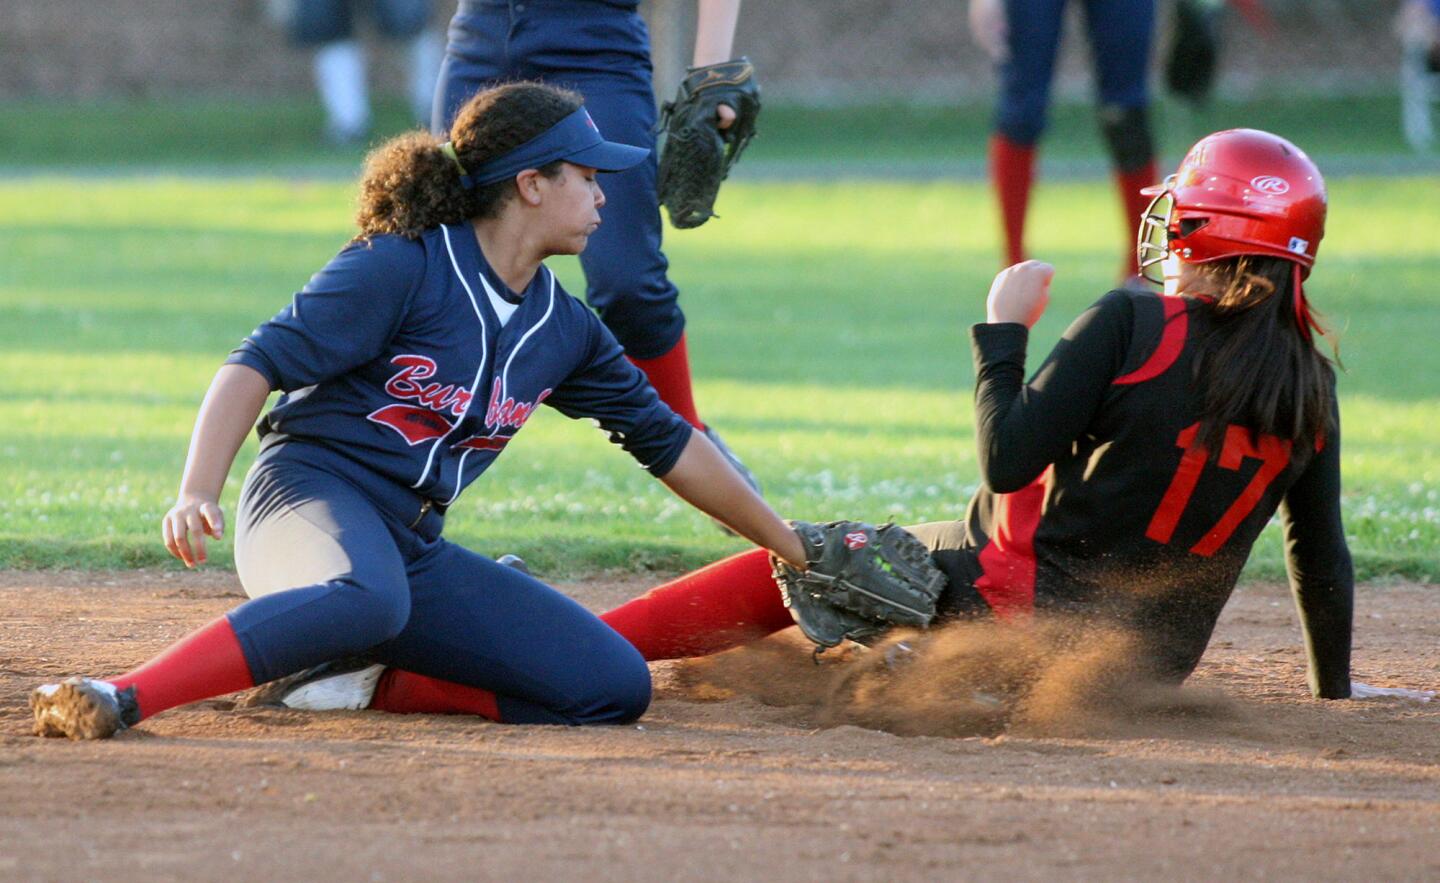 Burbank All-Stars' Chloe Bookmeyer tags Foothill All-Stars' Ashley Hernandez out at second base in a steal attempt in a Little League majors softball tournament game at Scholl Canyon Fields in Glendale on Wednesday, June 25, 2014. (Tim Berger/Staff Photographer)